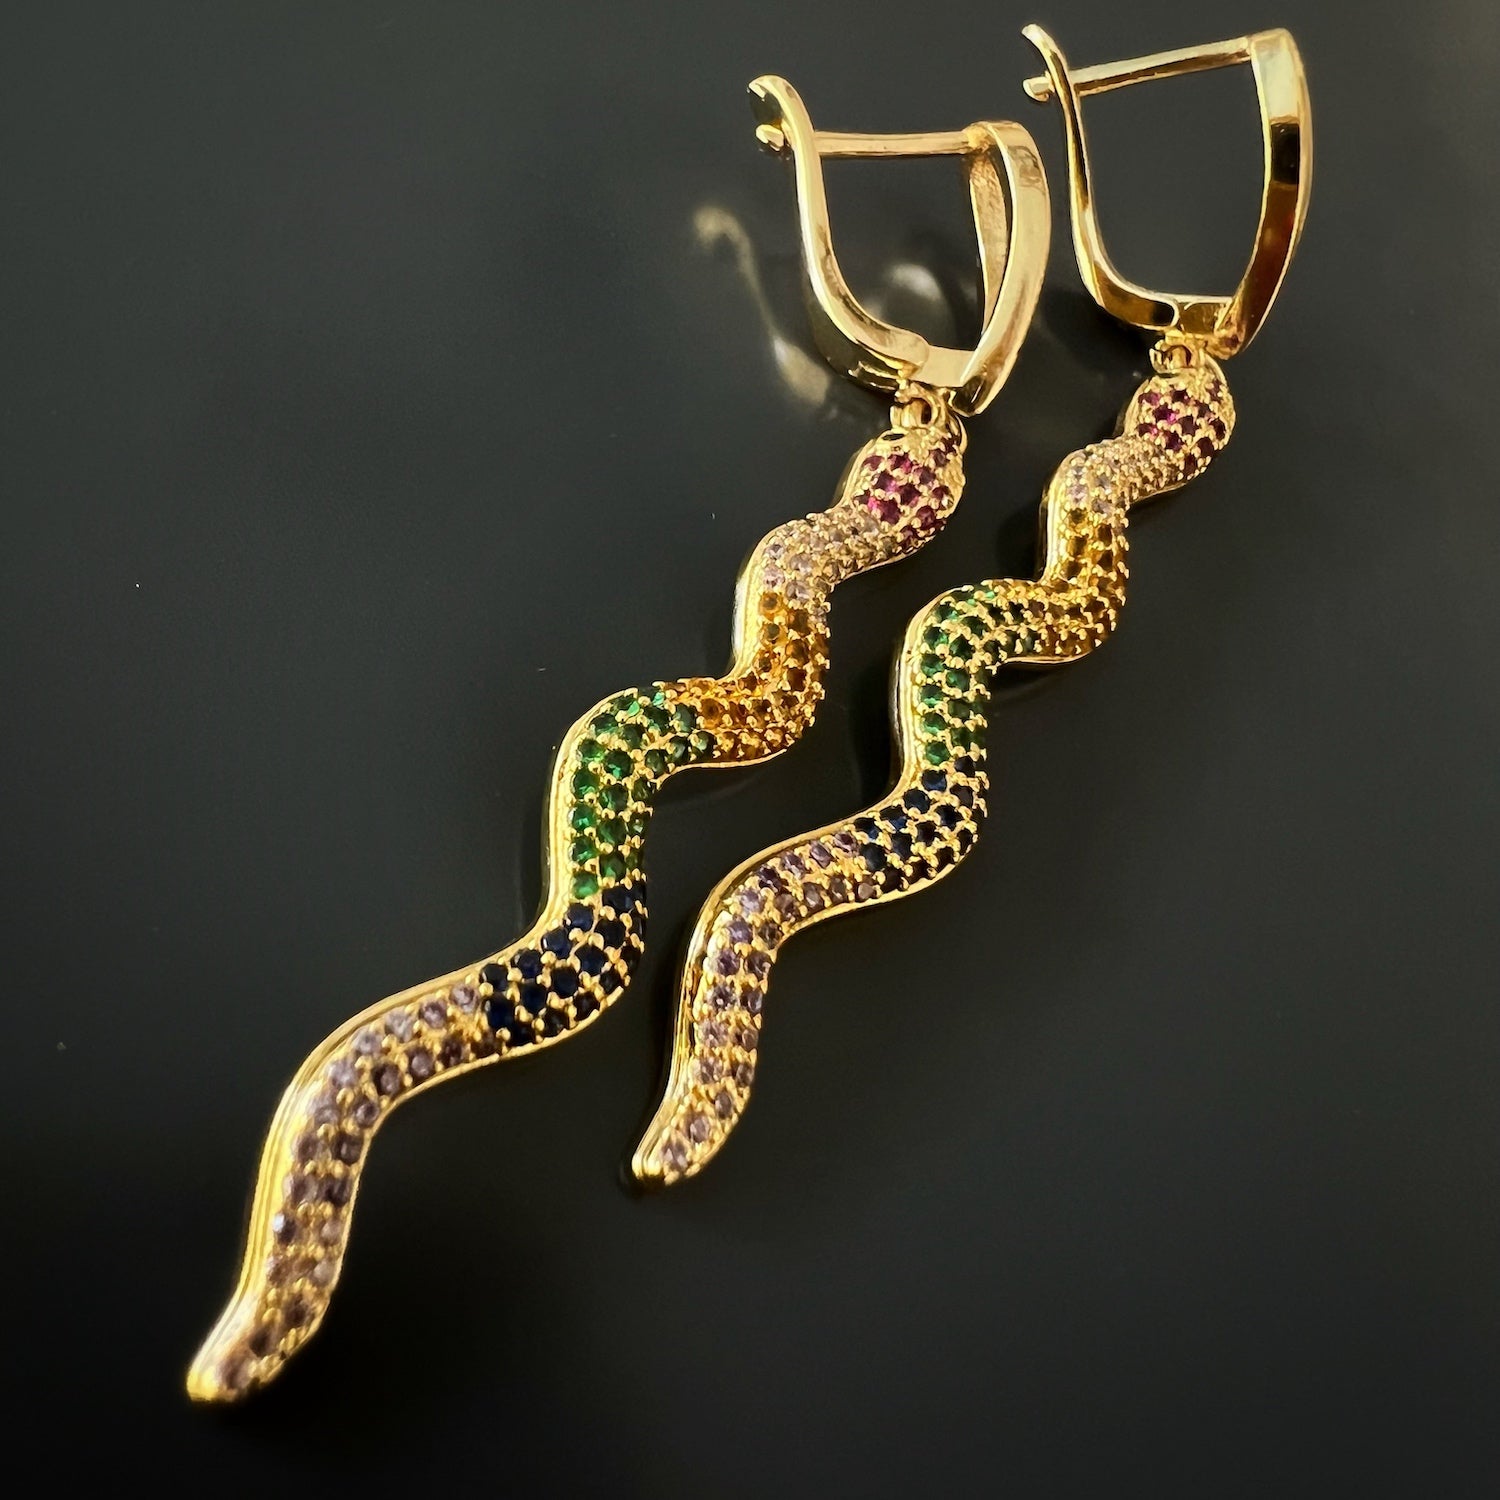 Handmade Cheerful Snake Earrings with a fun and stylish gold-plated snake design.